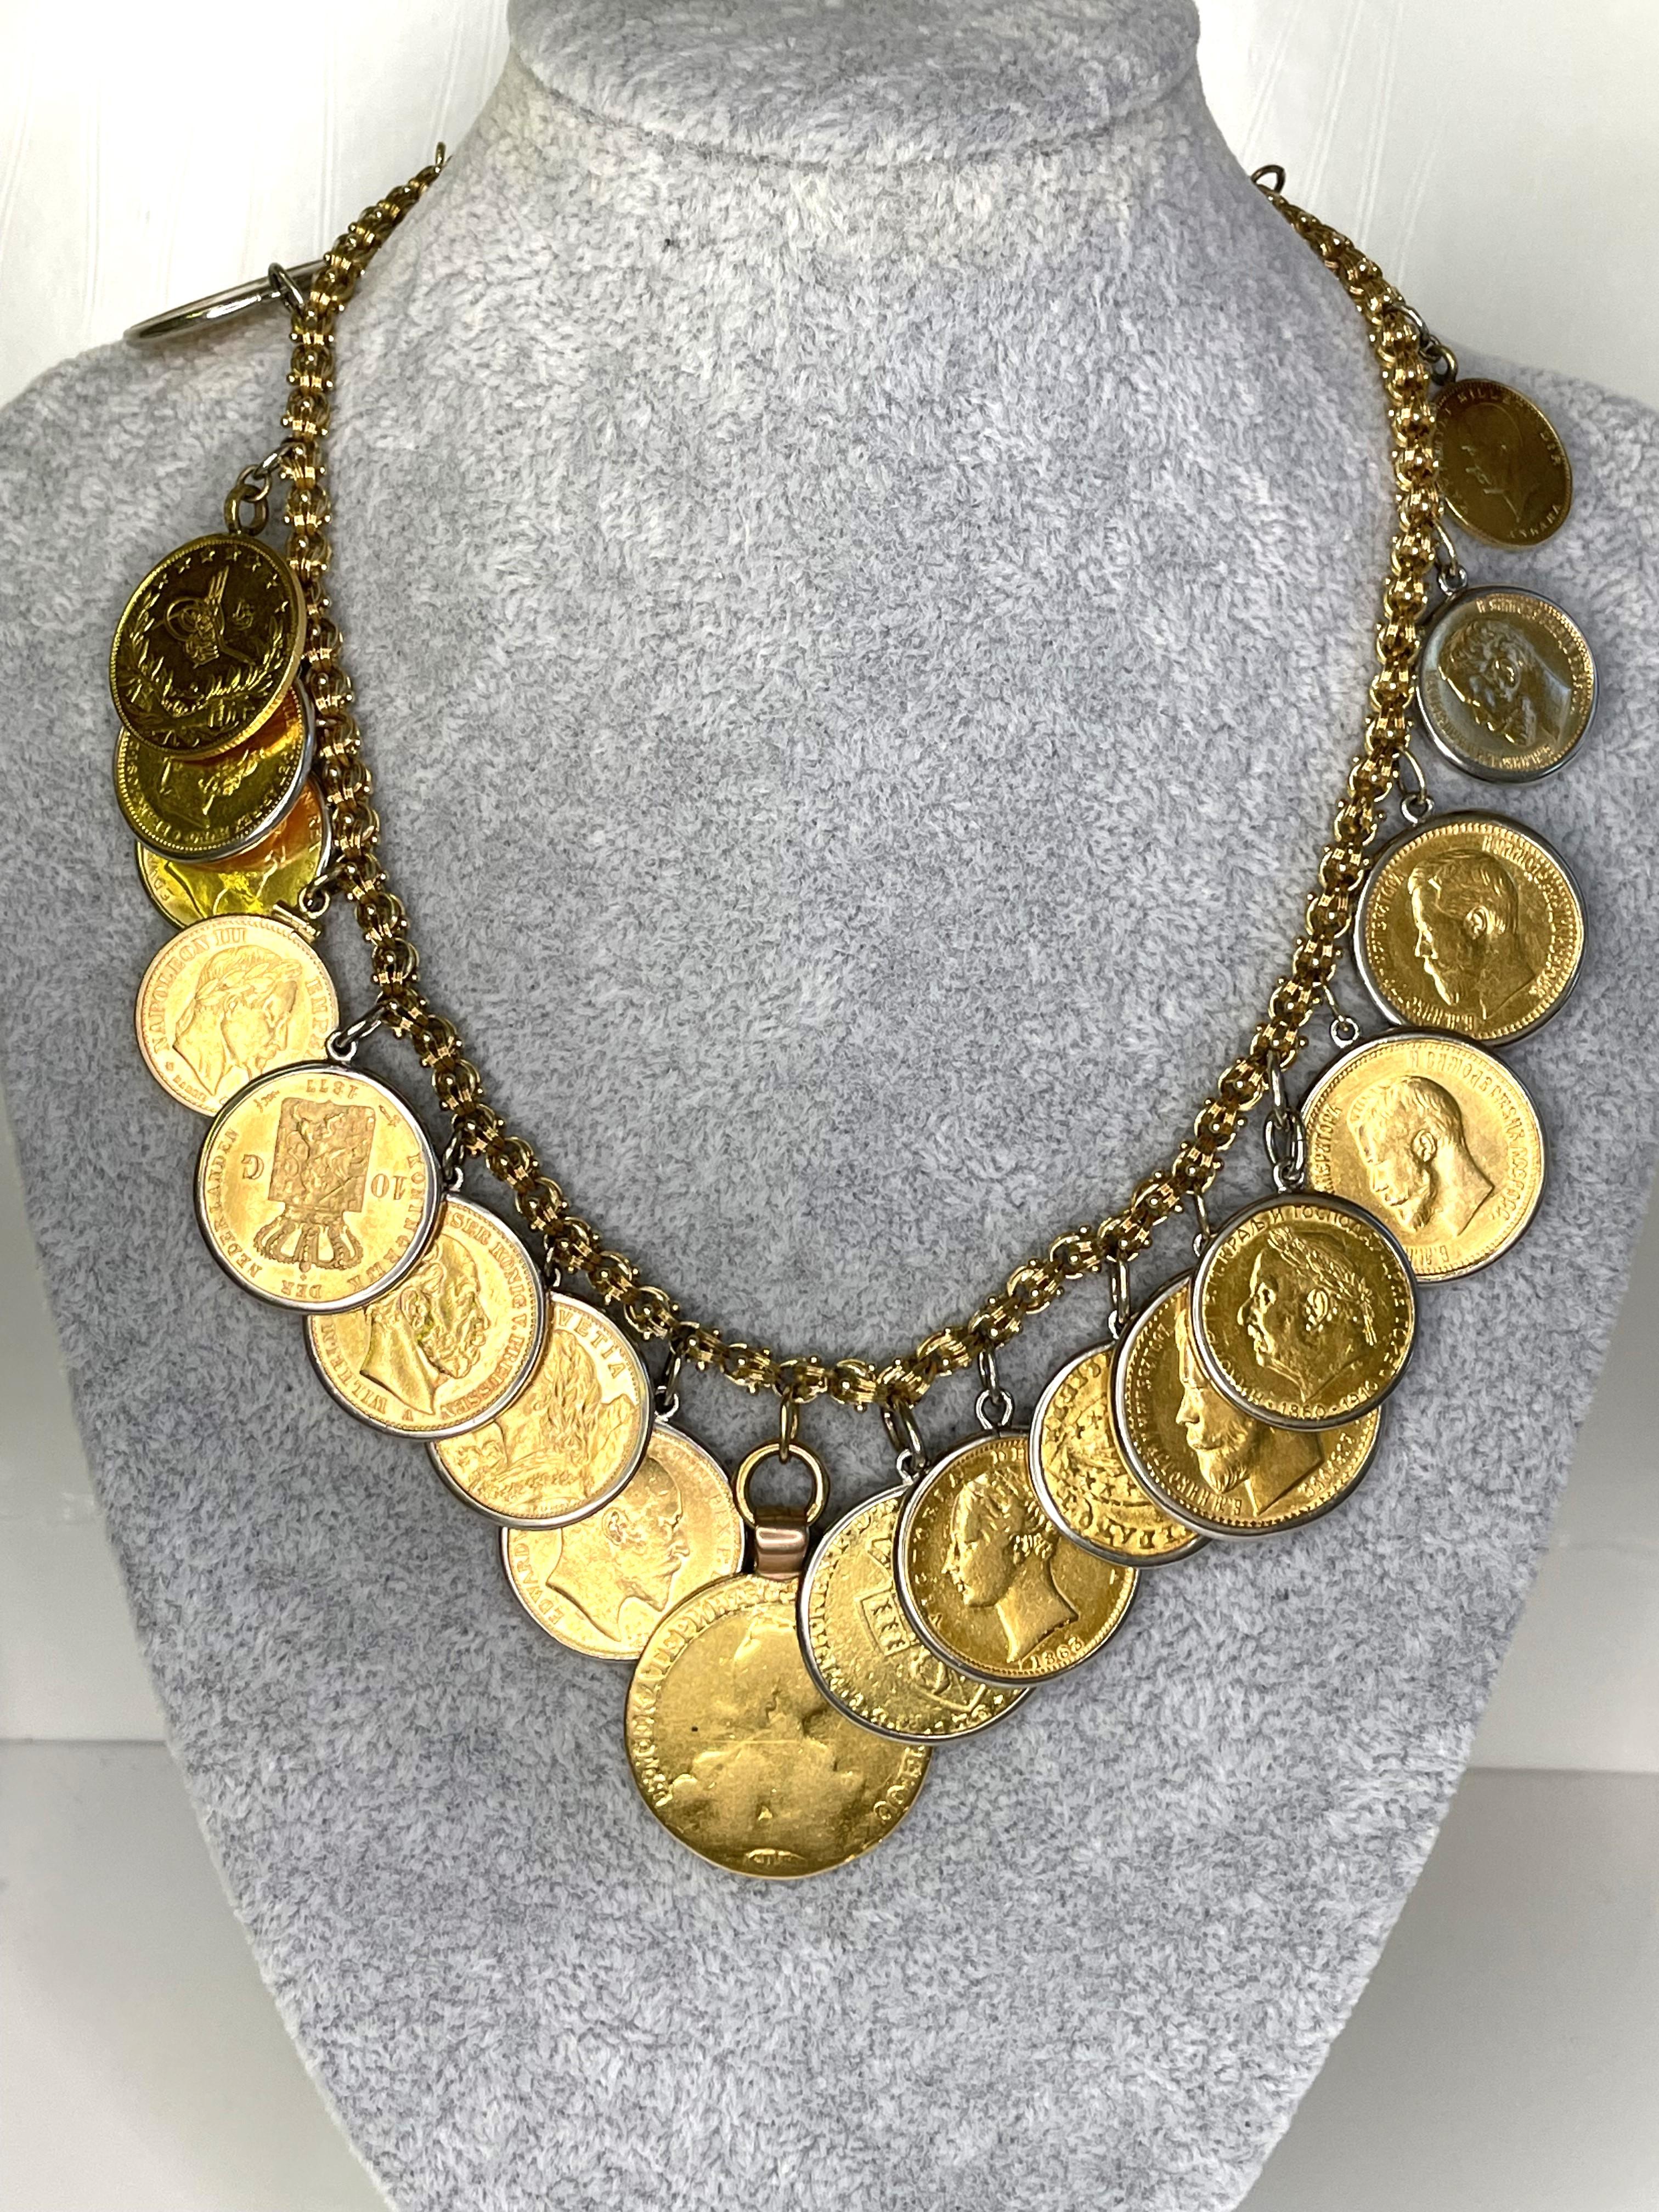 This one-of-a-kind necklace will be an awesome addition to any wardrobe and become a favorite piece for years to come! 
14 karat yellow fancy link chain.
23 coins in varying sizes adorn this unique necklace.
Largest round coin is approximately 28mm